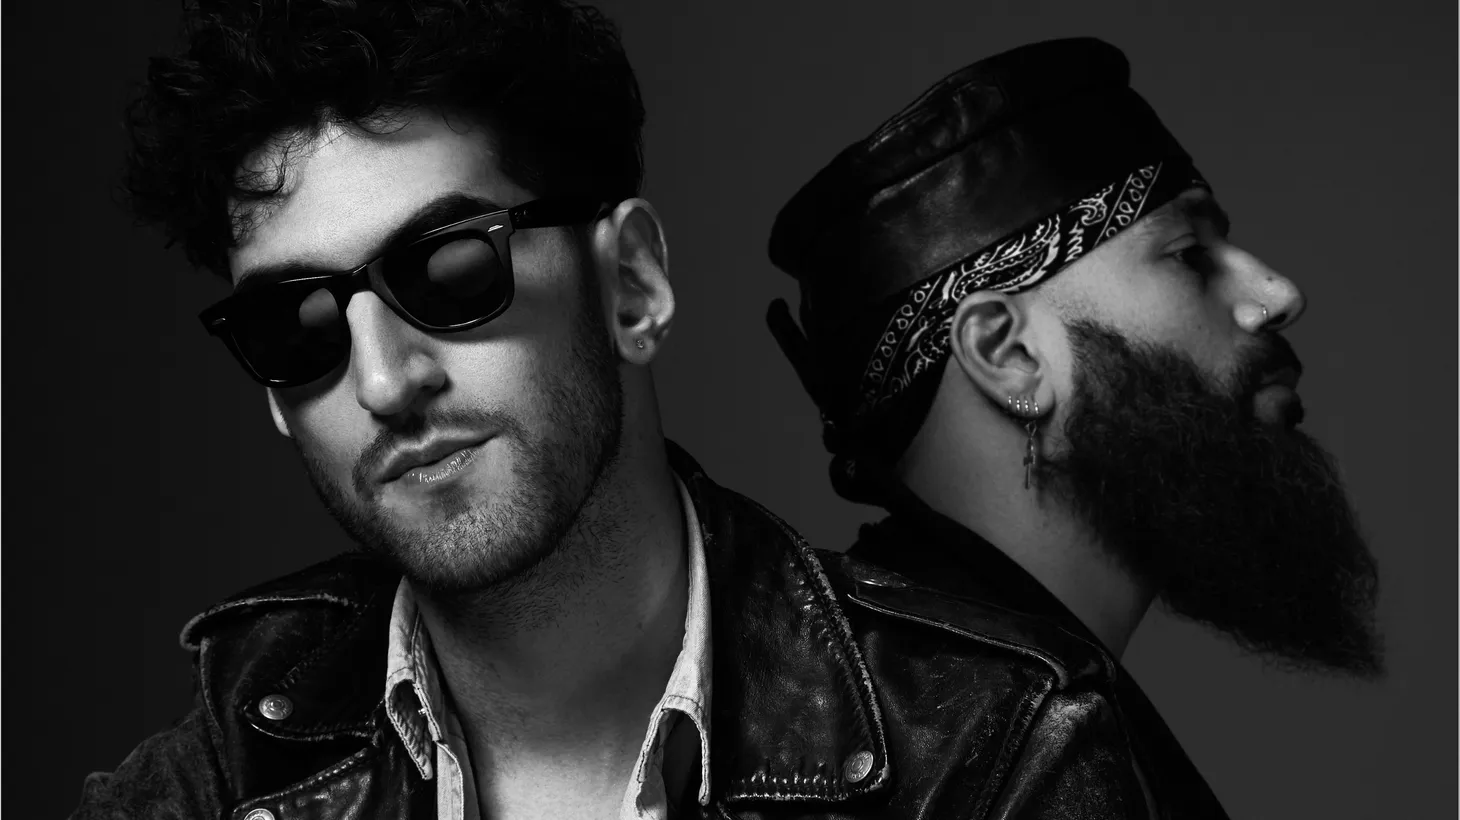 Electro-funk duo Chromeo will be here to get the weekend started right. They bring a party wherever they go and stop by for a live set in the midst of an international tour, including appearances at Outside Lands and Bumbershoot.